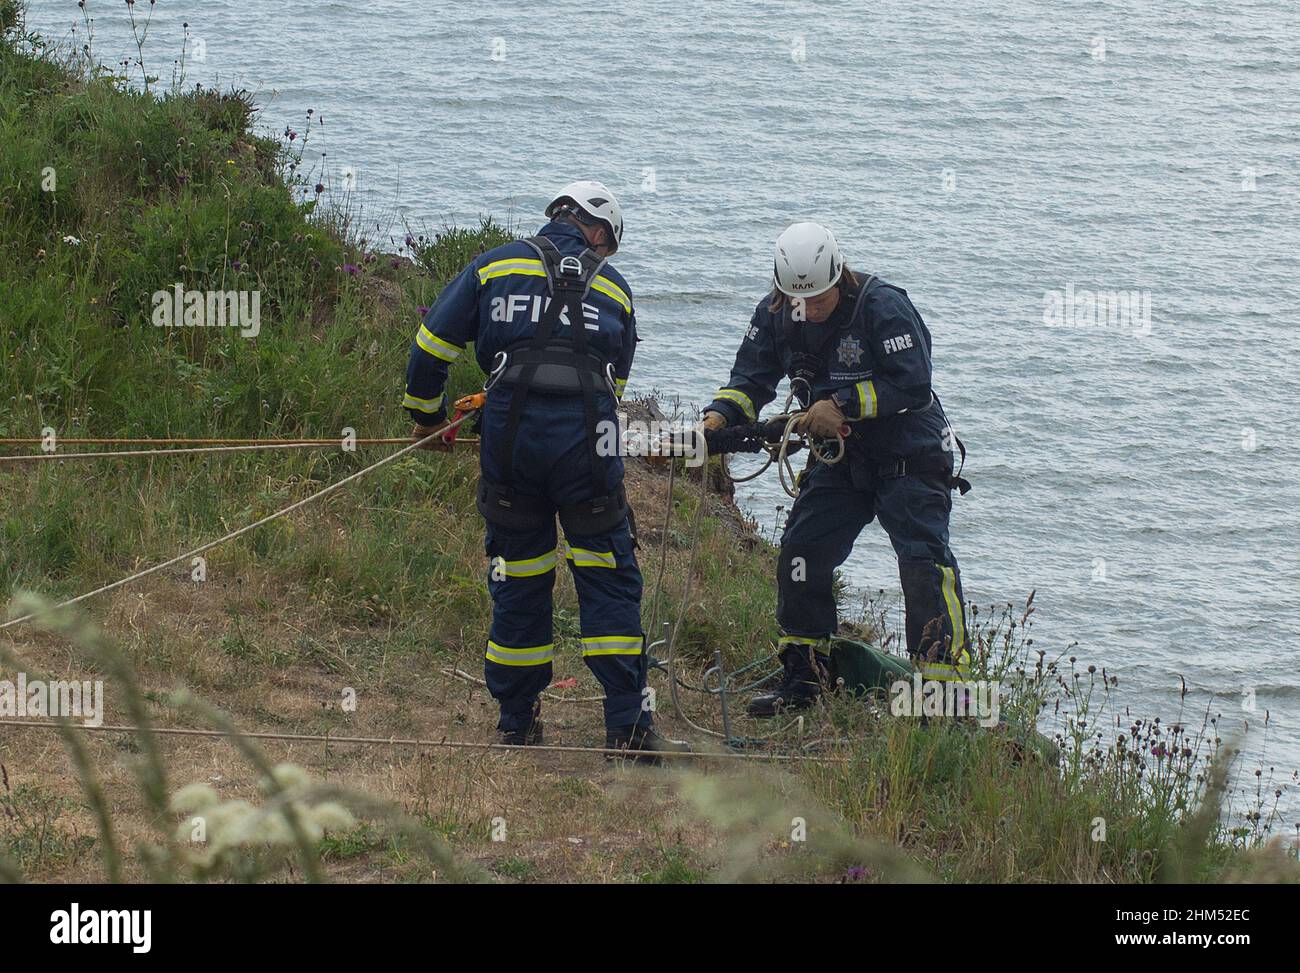 Firemen on a cliff rescue training exercise ready to descend a coastal cliff on the North East coast. Stock Photo